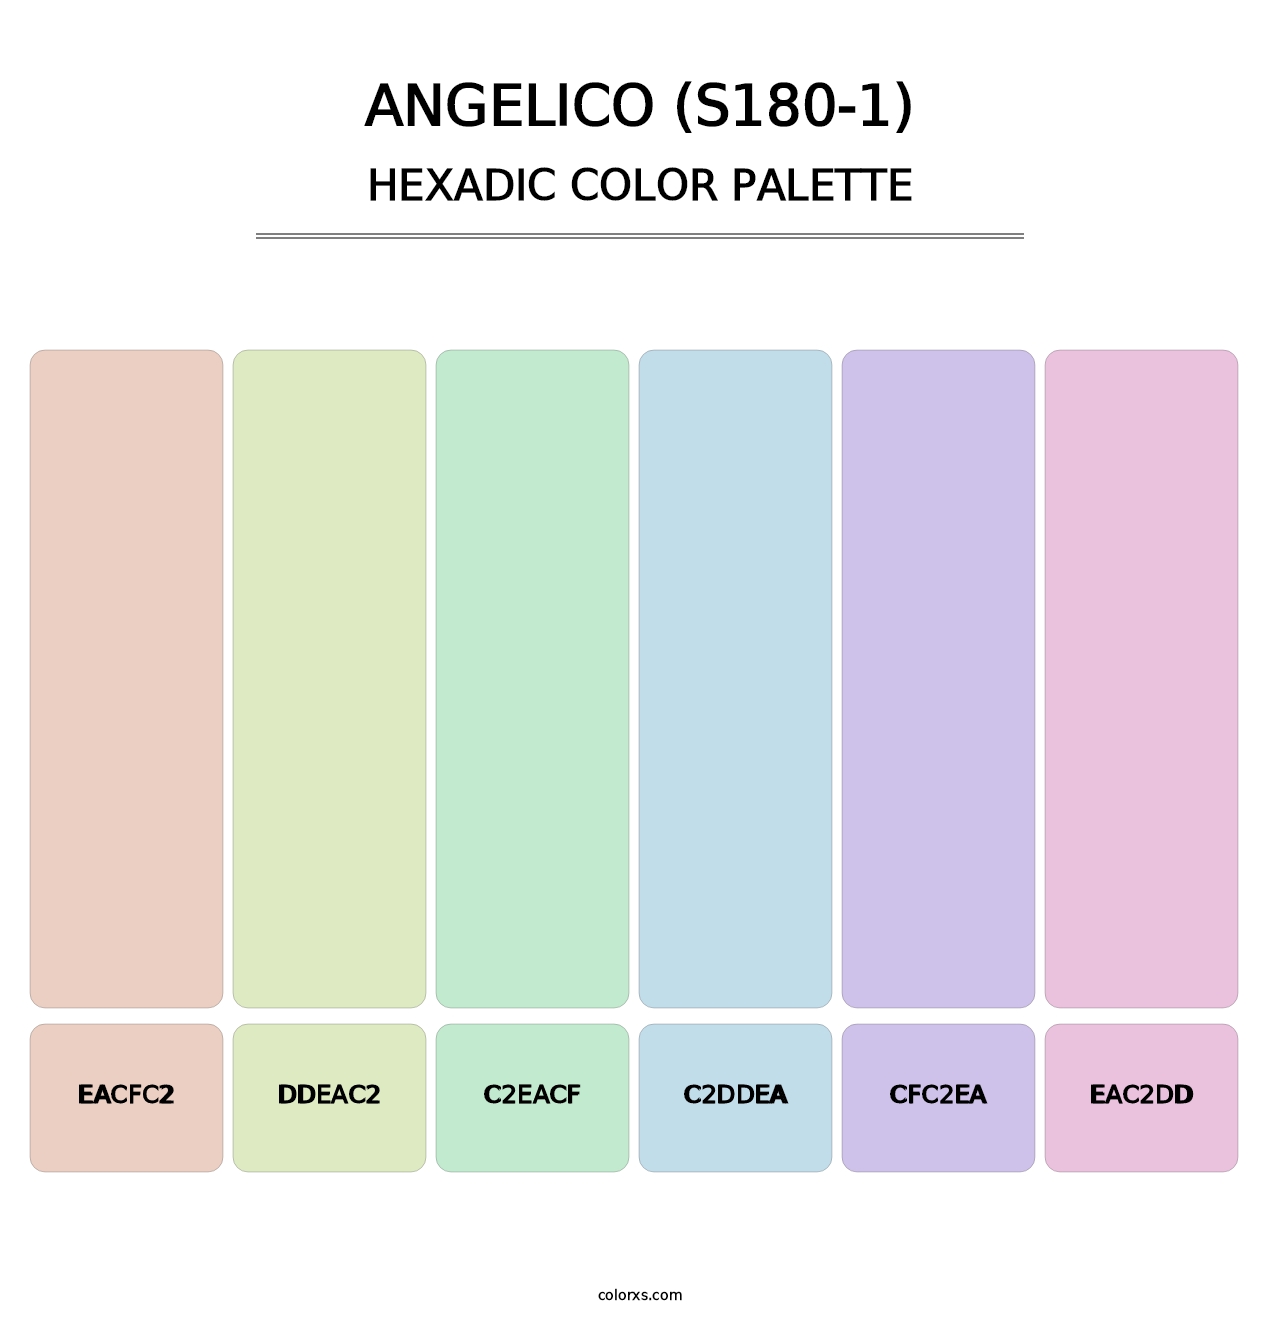 Angelico (S180-1) - Hexadic Color Palette